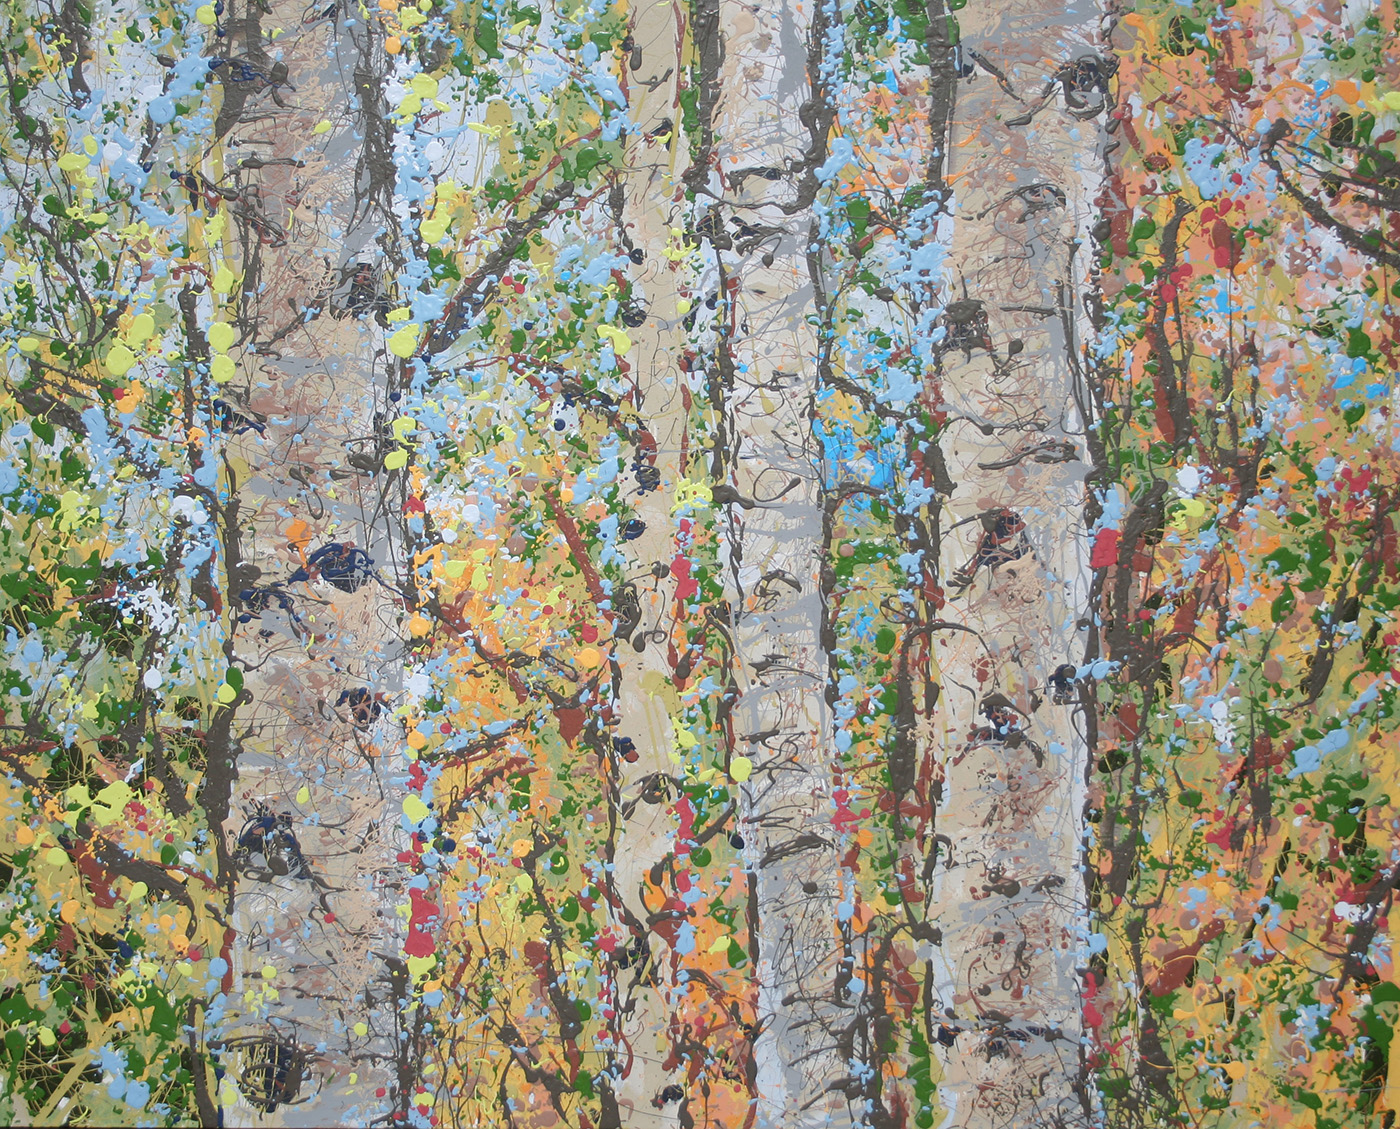 Aspen Grove Latex Enamel Painting on Gallery Wrapped Canvas by Fort Collins, Colorado Artist Lisa Cameron Russell